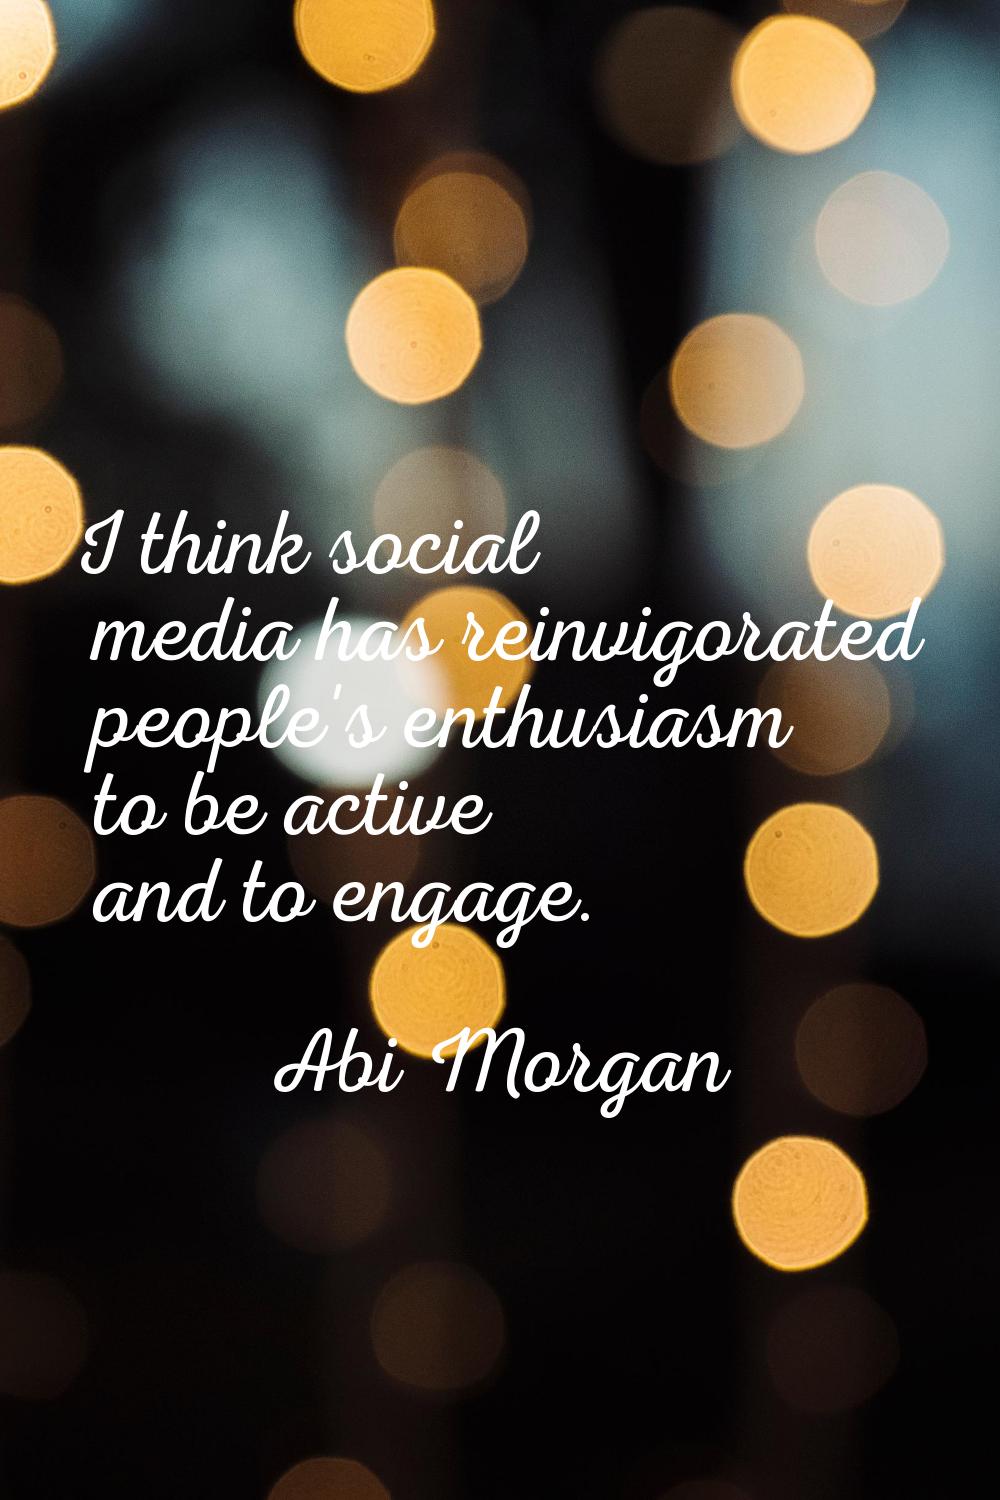 I think social media has reinvigorated people's enthusiasm to be active and to engage.